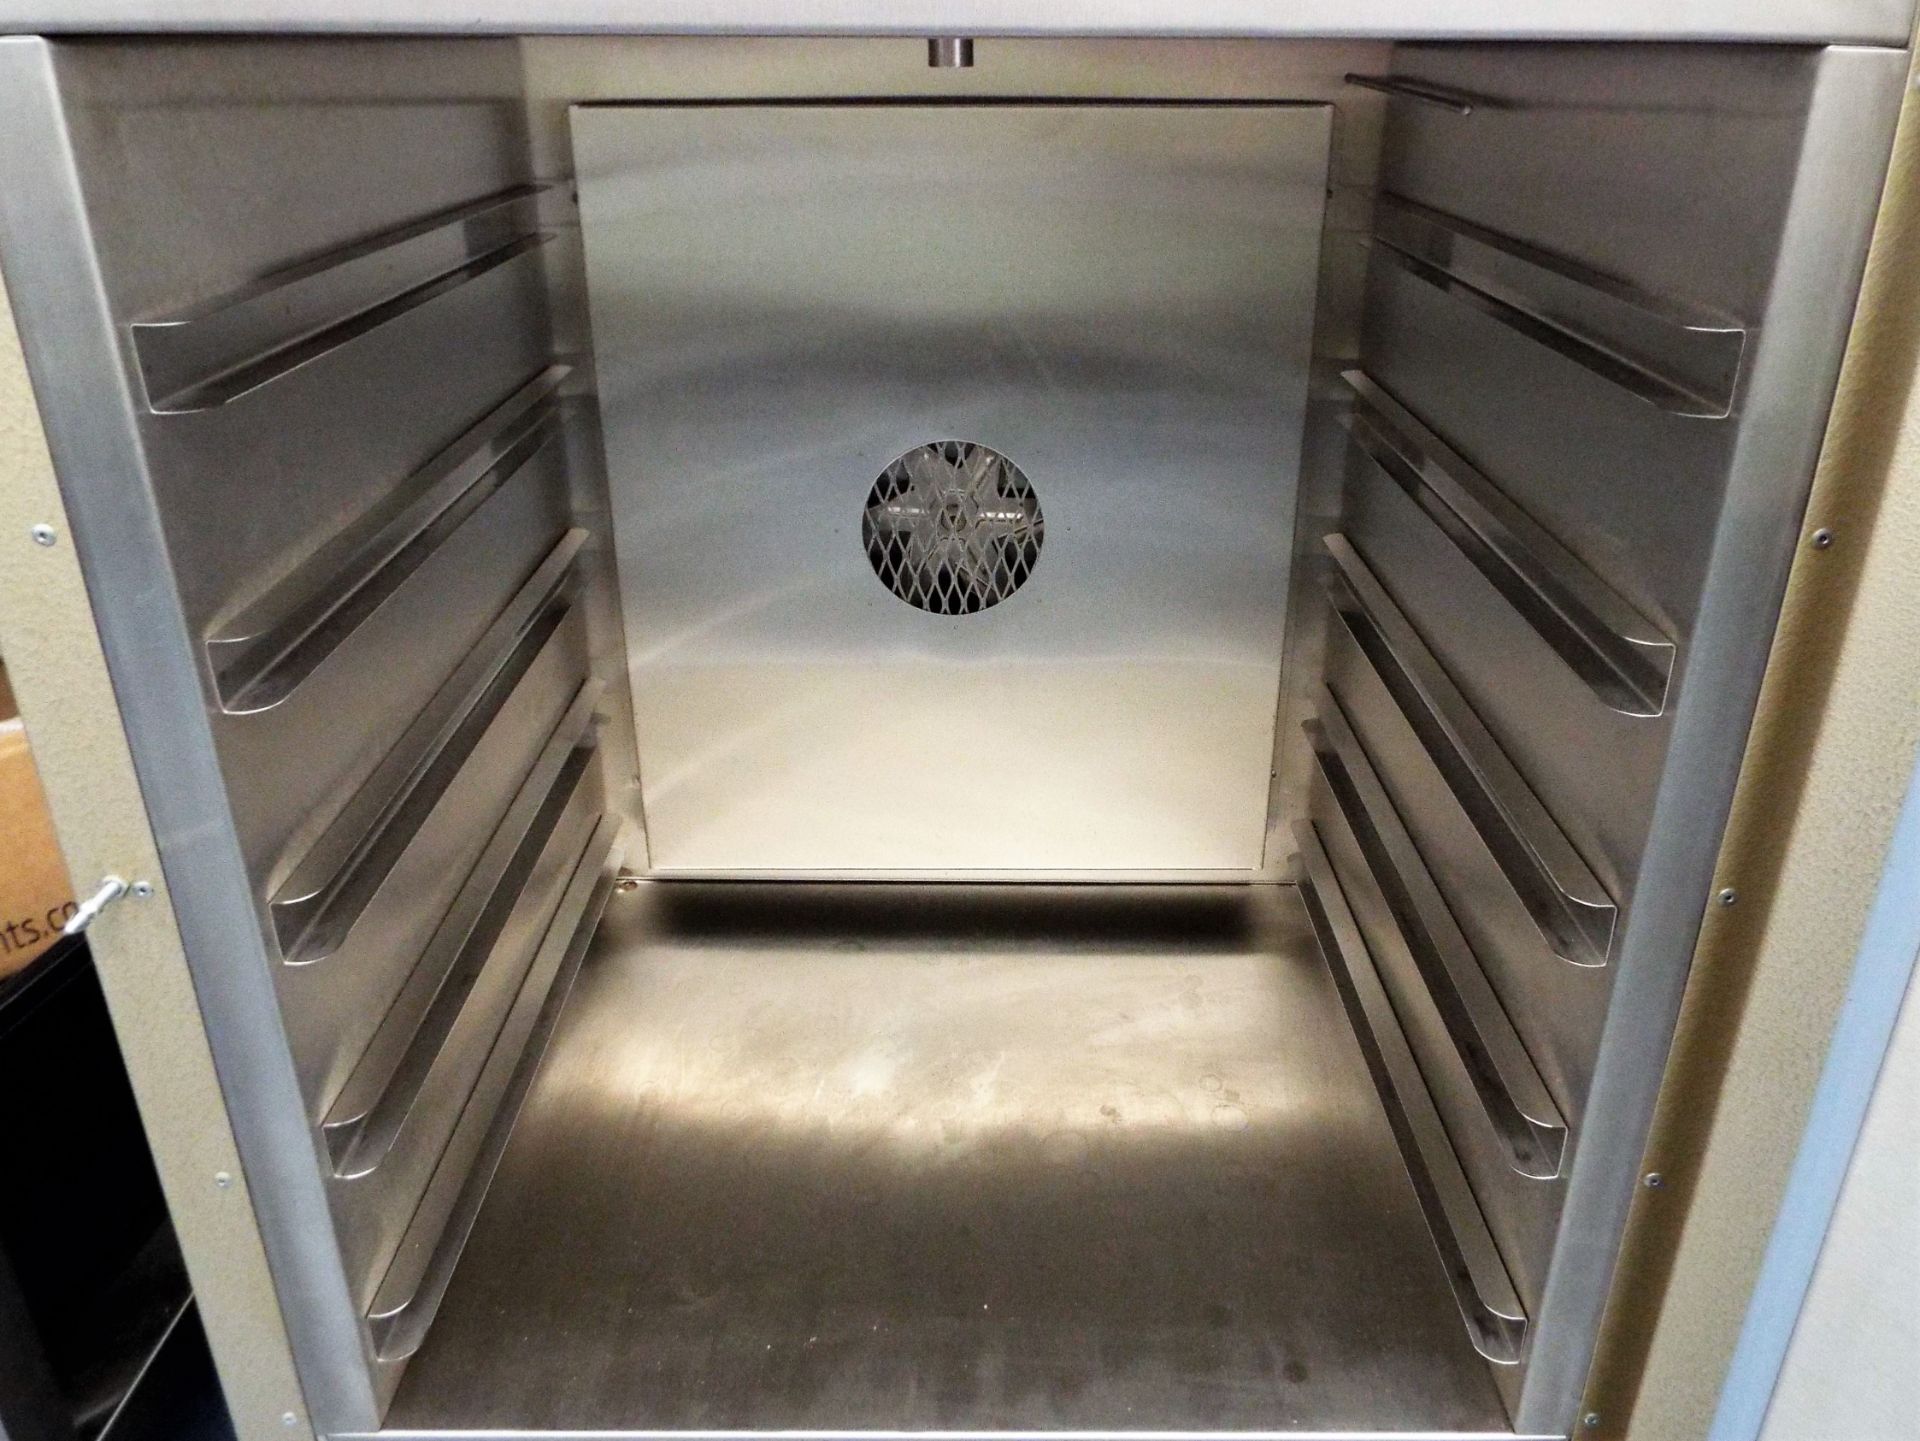 Emcol NDT Equipment Fan Assisted Lab Oven - 0-250 Deg C - Image 4 of 5